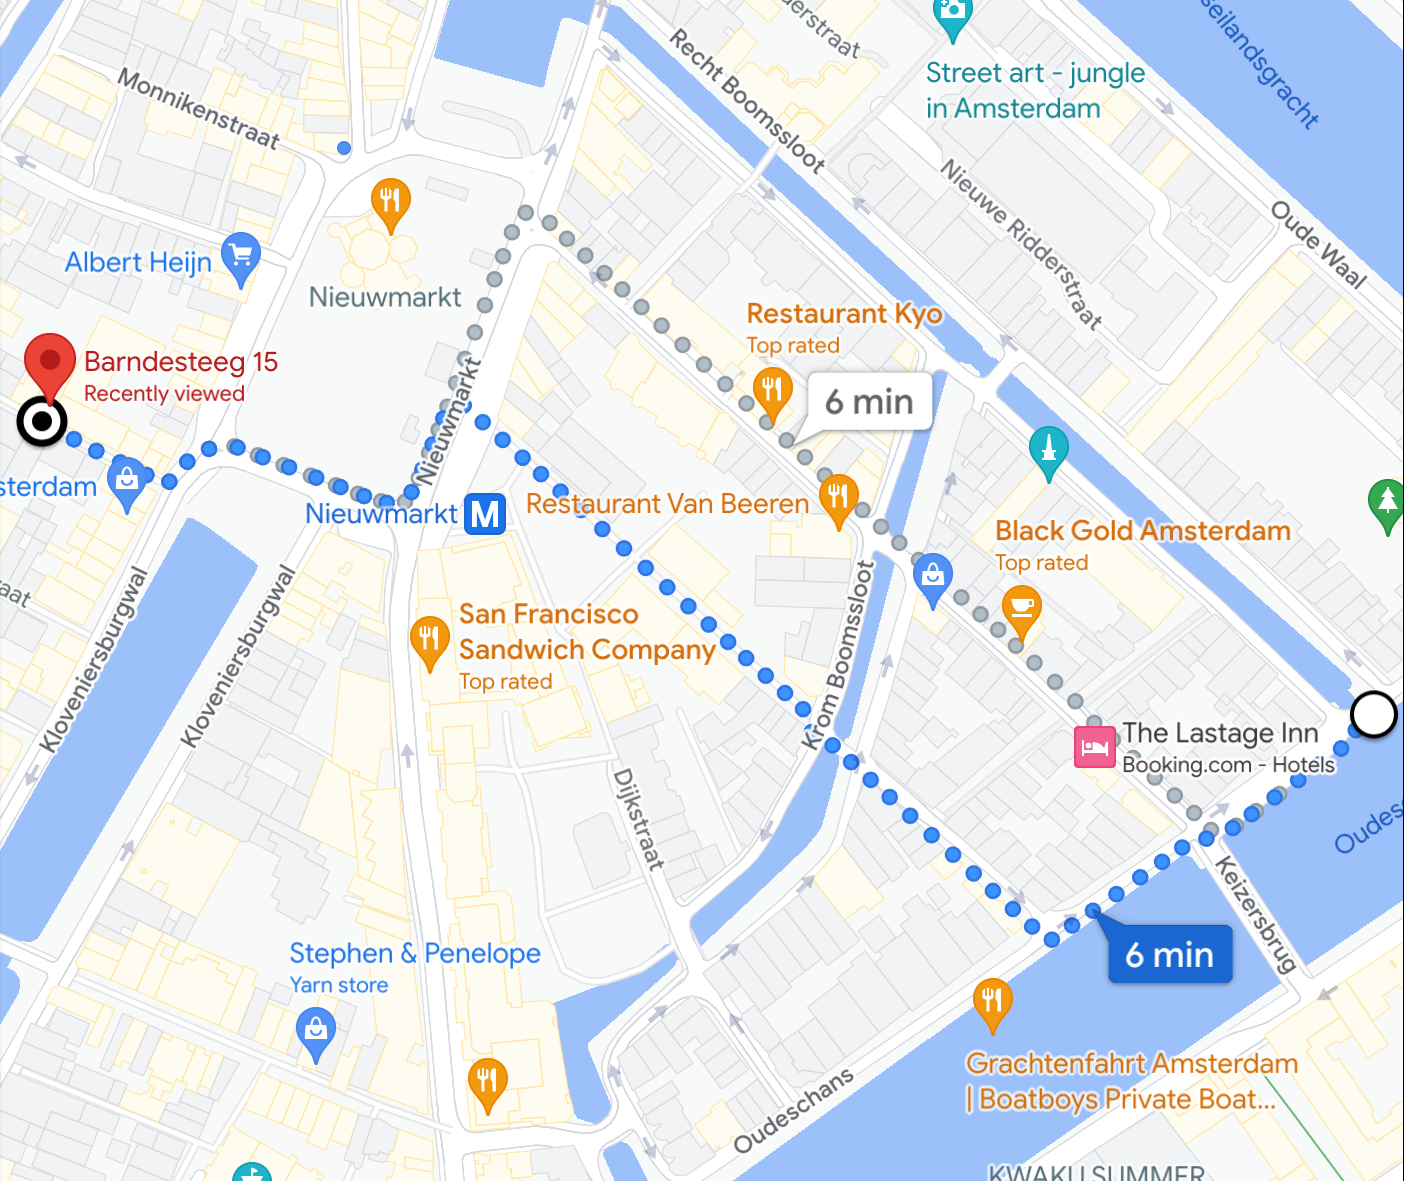 The walk from my flat in Barndesteeg to my great-grandfather's street. Google maps